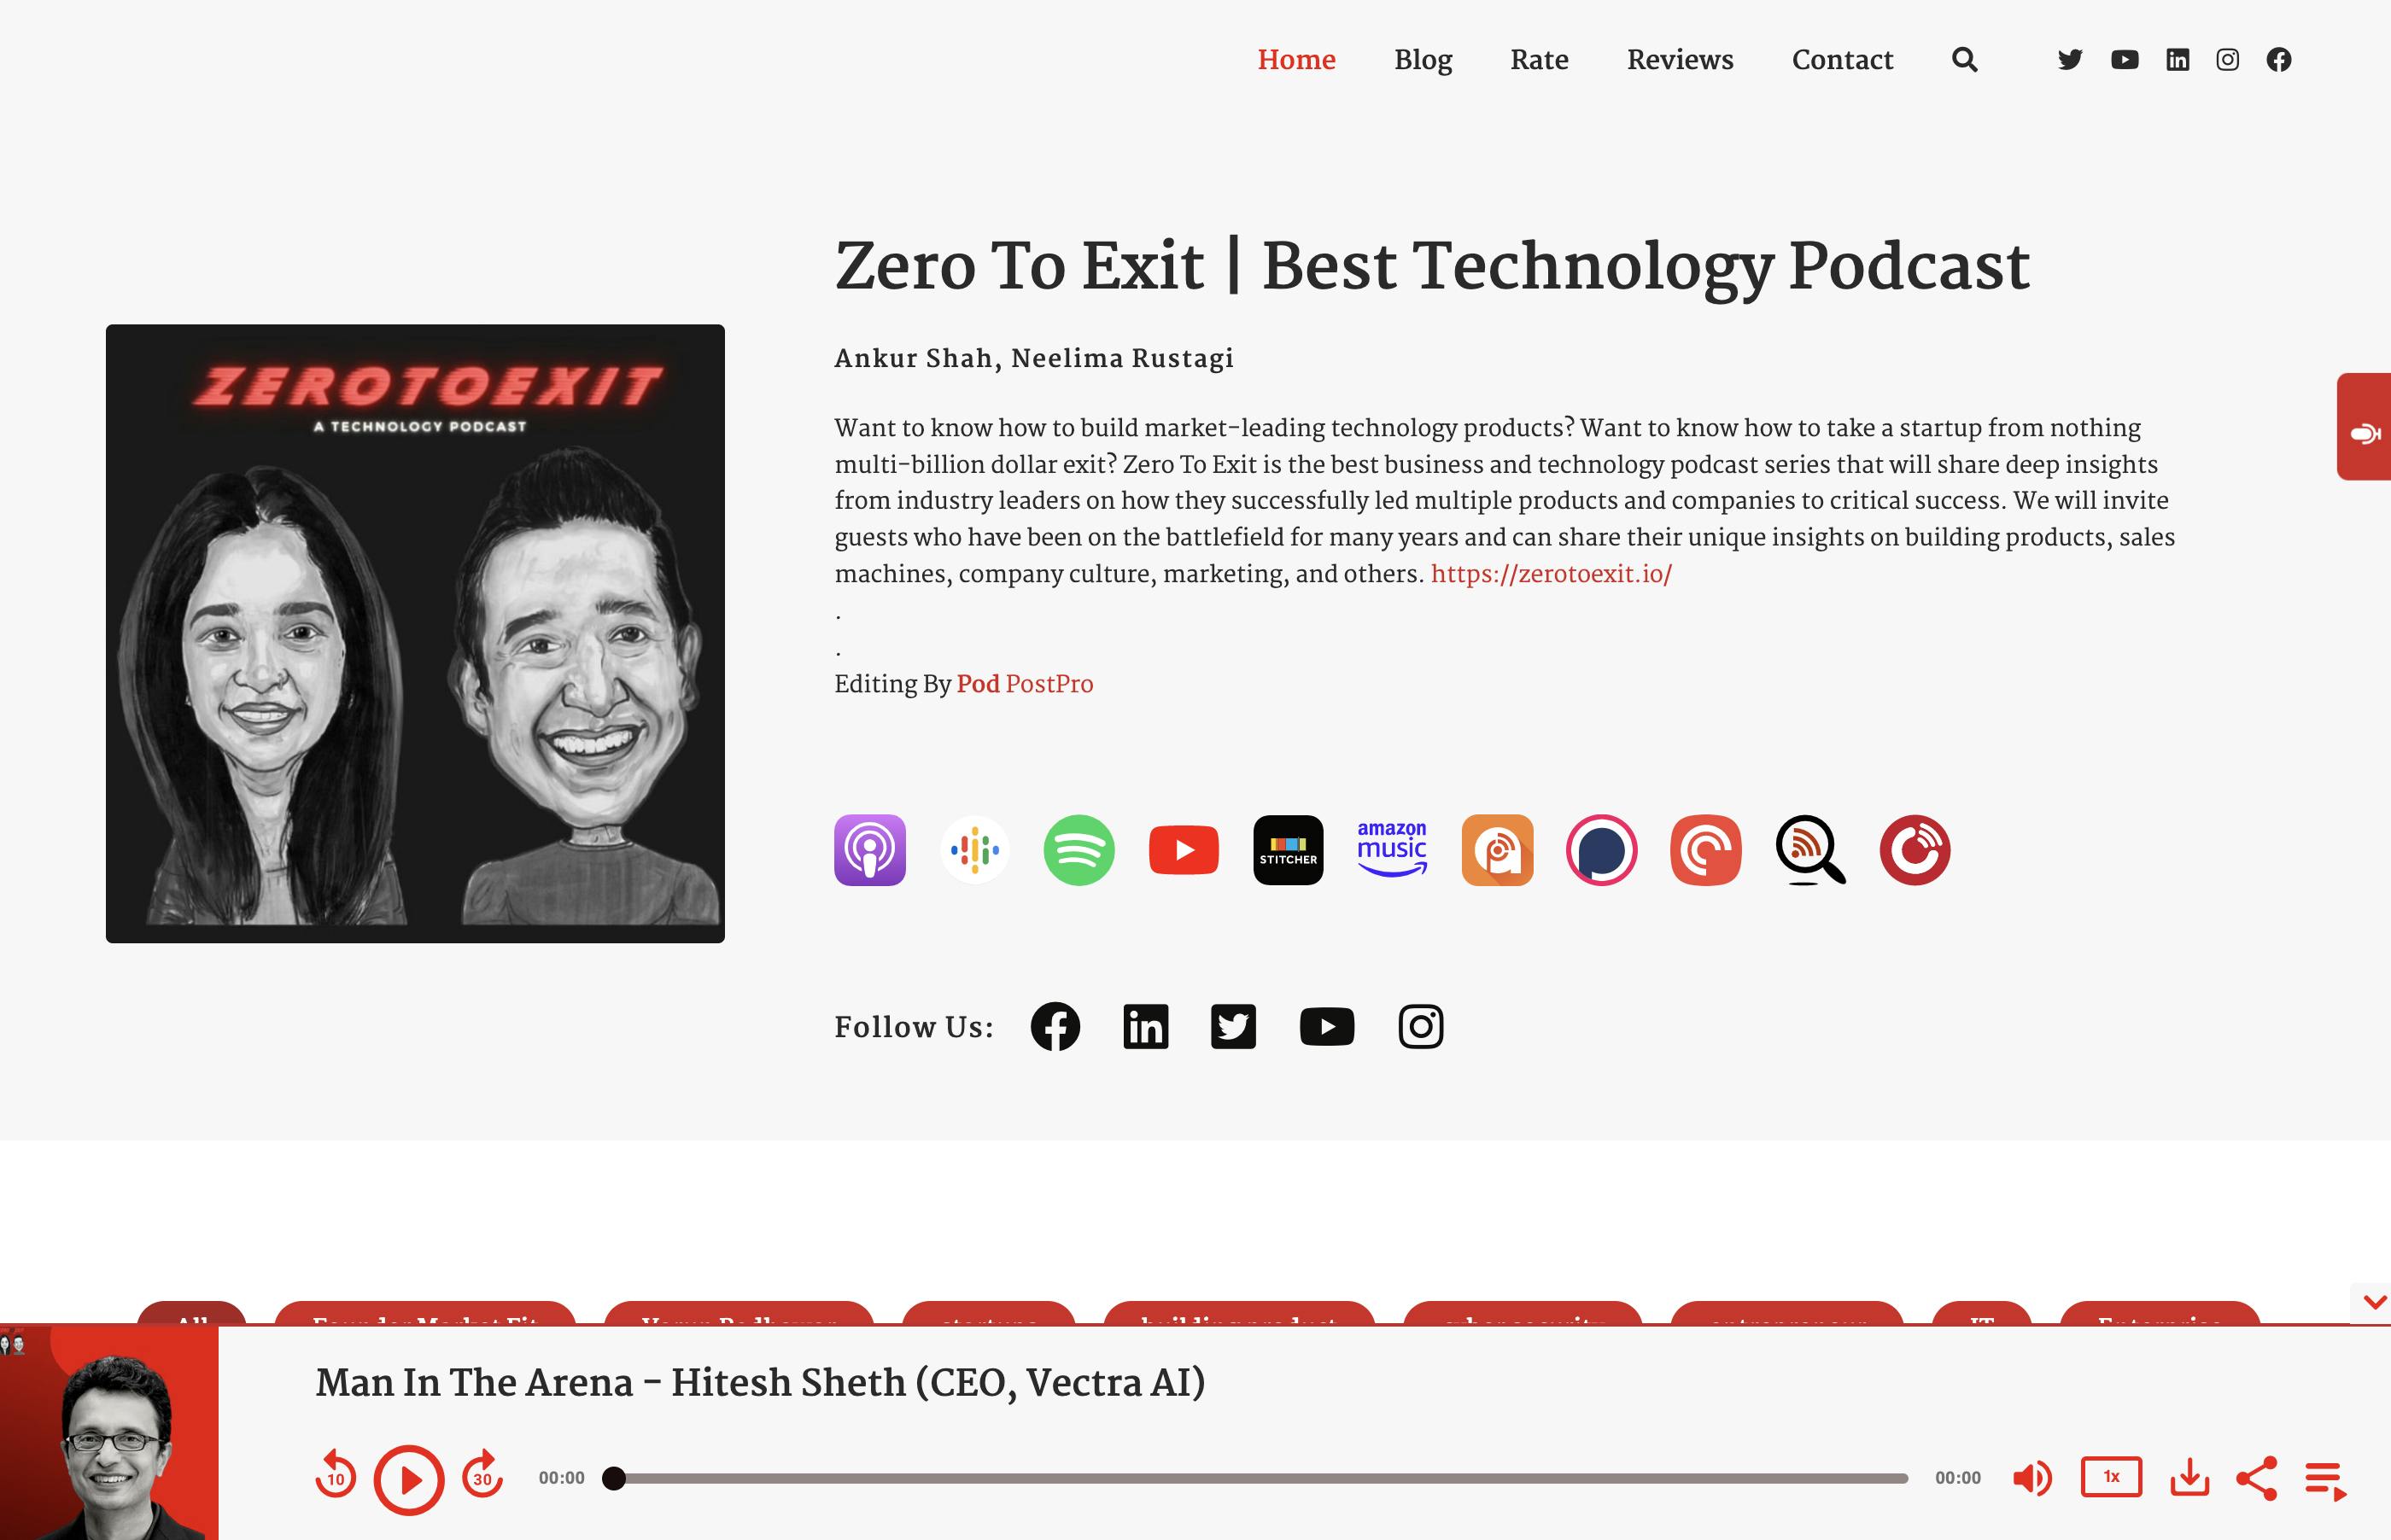 Zero to Exit podcast page